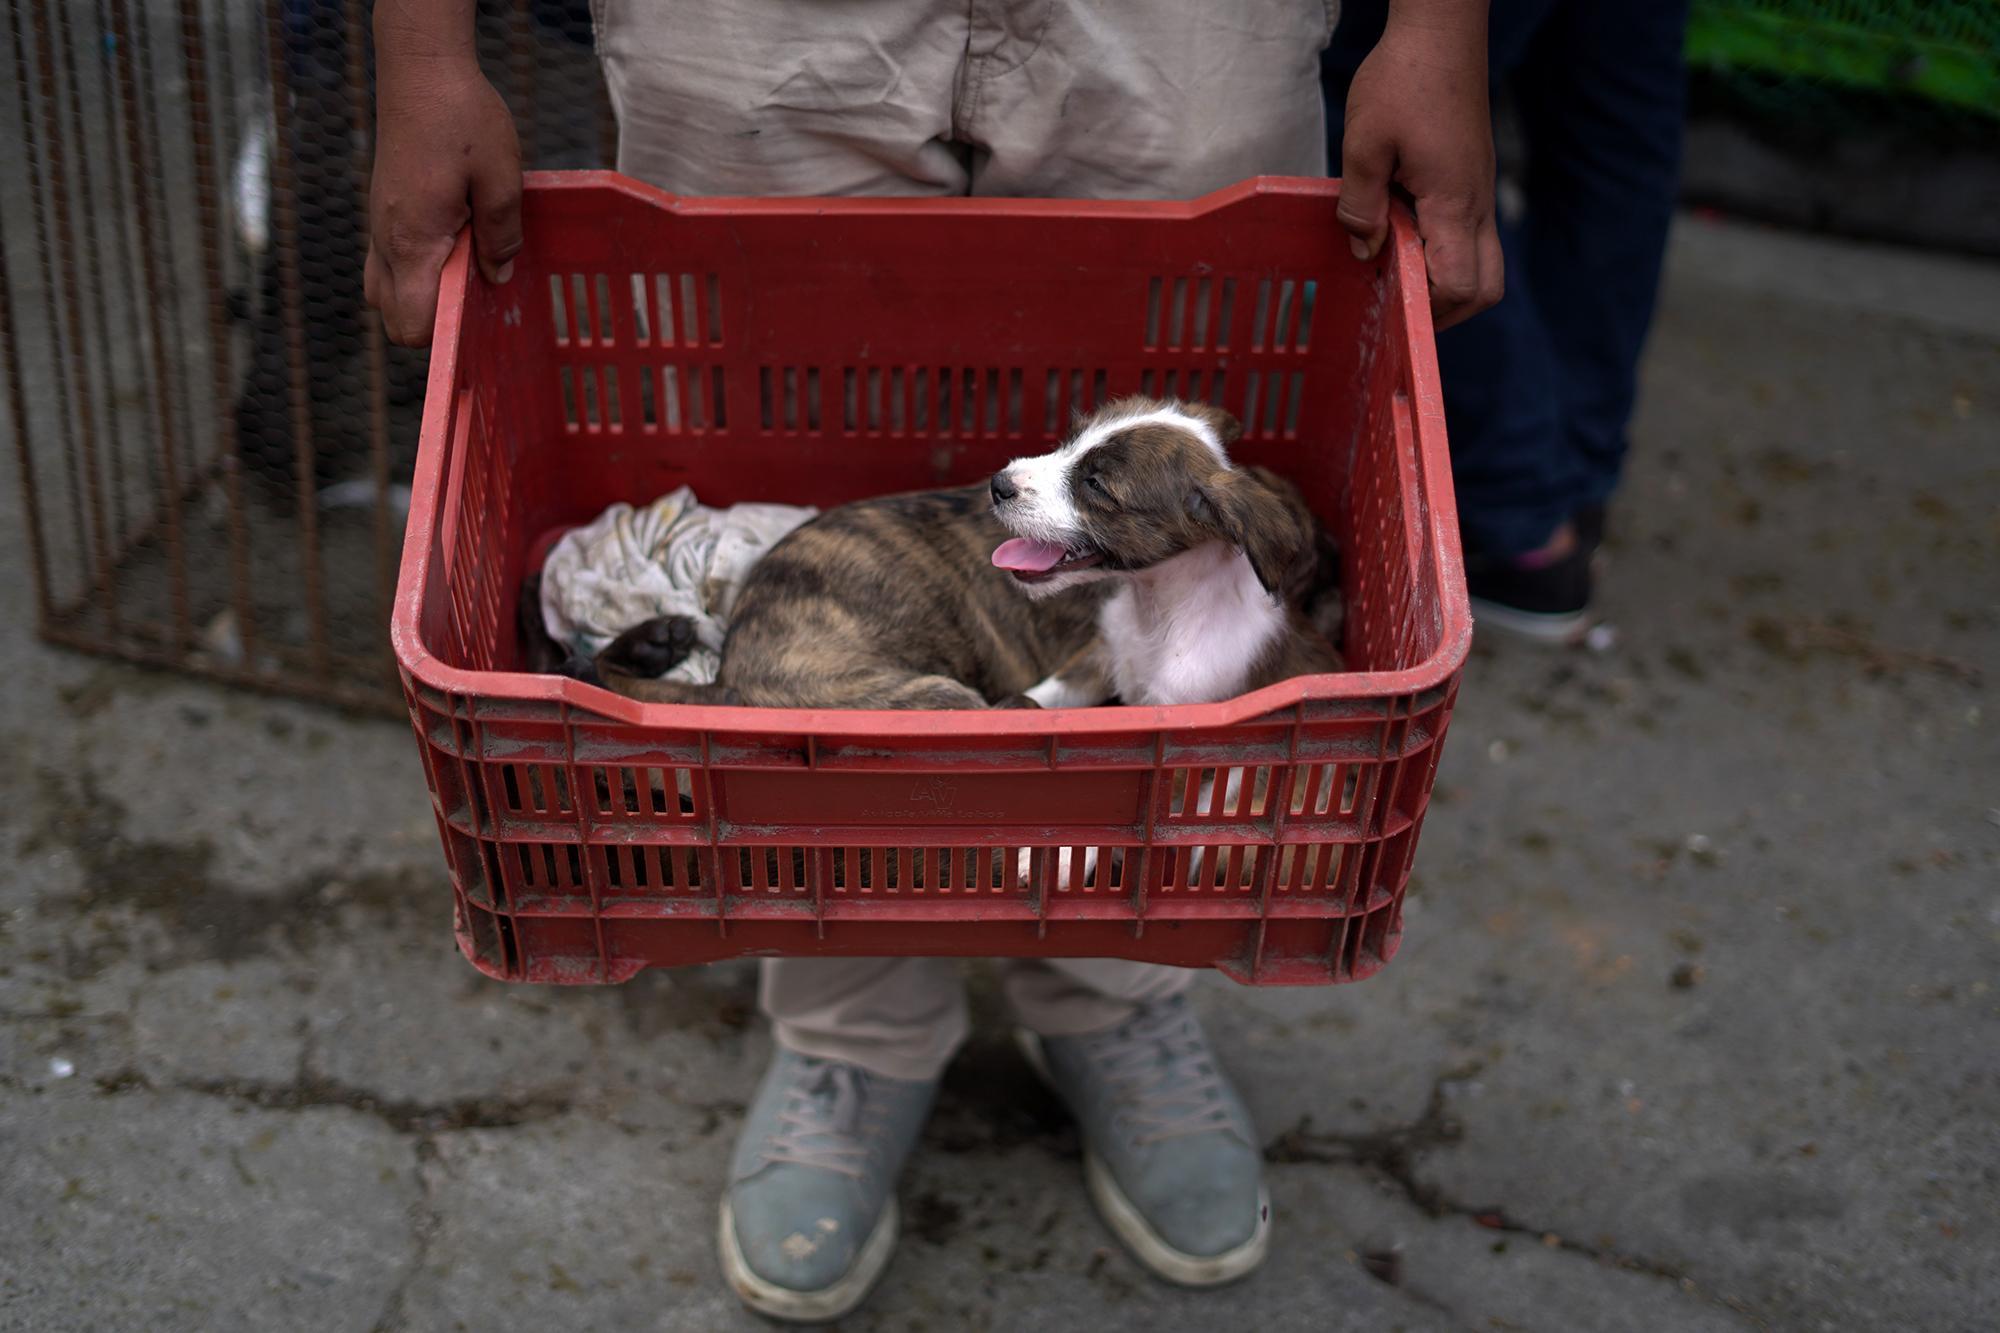 Máveric Sánchez, 15, a resident of Tonacatepeque, arrived at 7 a.m. to sell his puppies, four small dogs of two and a half months, which he says are a mix of Pitbull and French bulldog. It wasn’t until 9 a.m. that he sold one for $10. Máveric knows the business. Since he was little, he’s been coming with his father to buy and sell livestock in the tiangue at San Rafael Cedros. “Today I’m only here to sell, but if someone gives me a chicken, I’ll give them a puppy, but the chicken has to be free-range,”  Máveric says with his basket in hand.